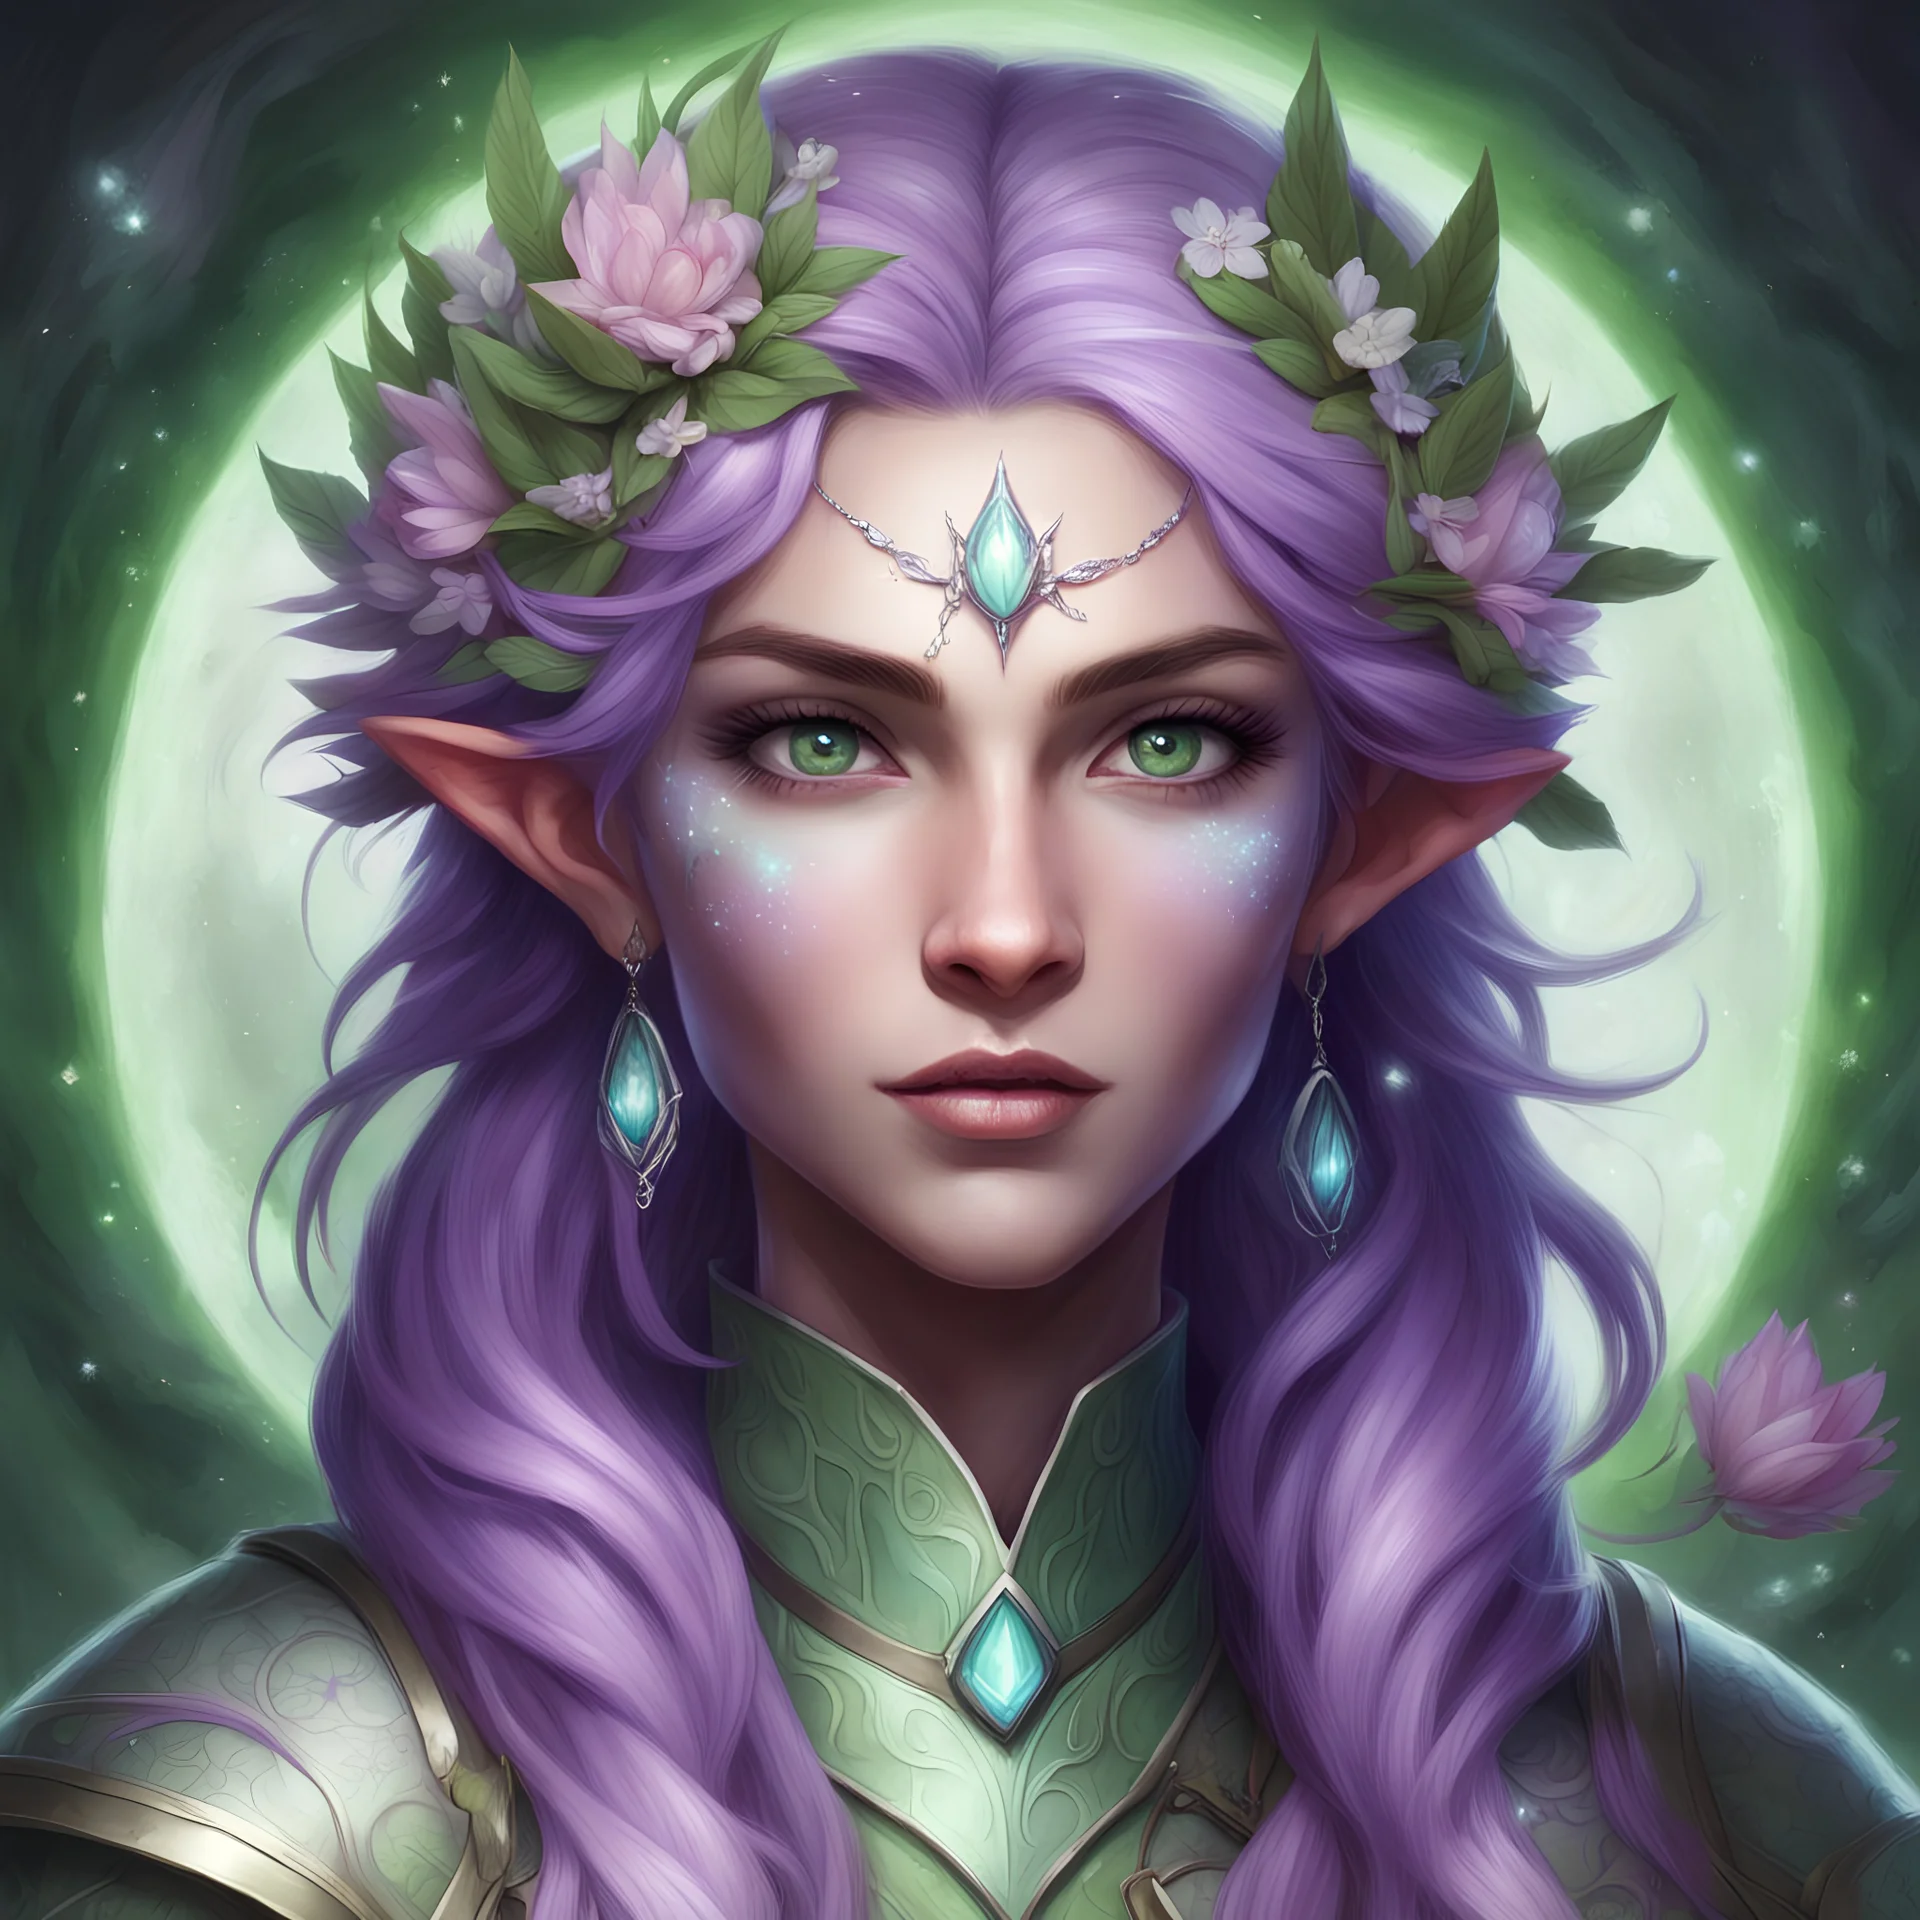 Generate a dungeons and dragons character portrait of the face of a female spring Eladrin. She is a circle of the Stars Druid, Twilight Cleric. Her hair is purple-pink and voluminous. Her skin is a soft green. Her eyes are like new flowers. She wears a dainty circlet made of silver coated branches with flowers.